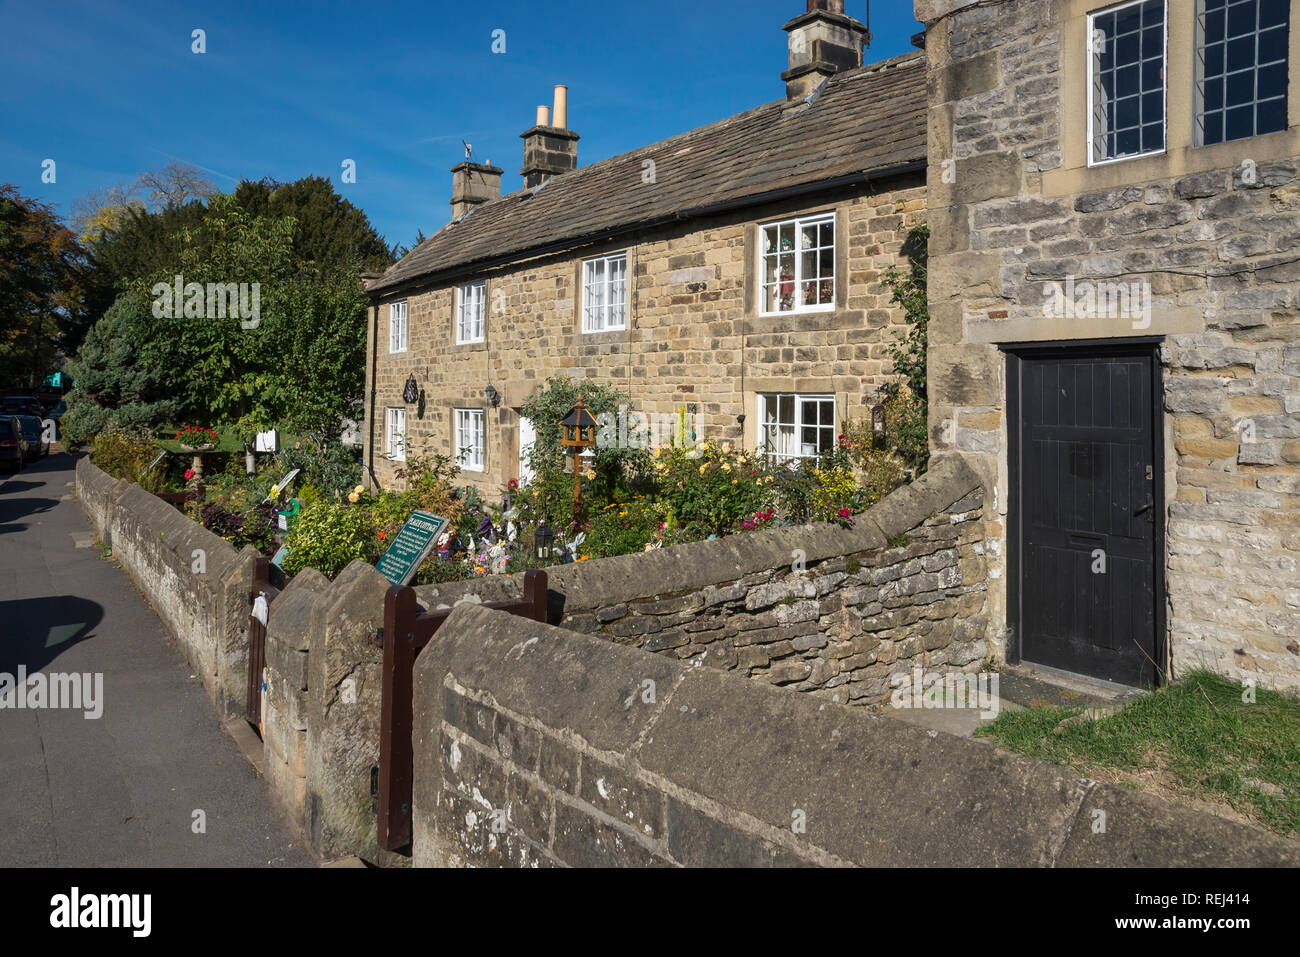 The Plague Cottages In The Historic Village Of Eyam Derbyshire